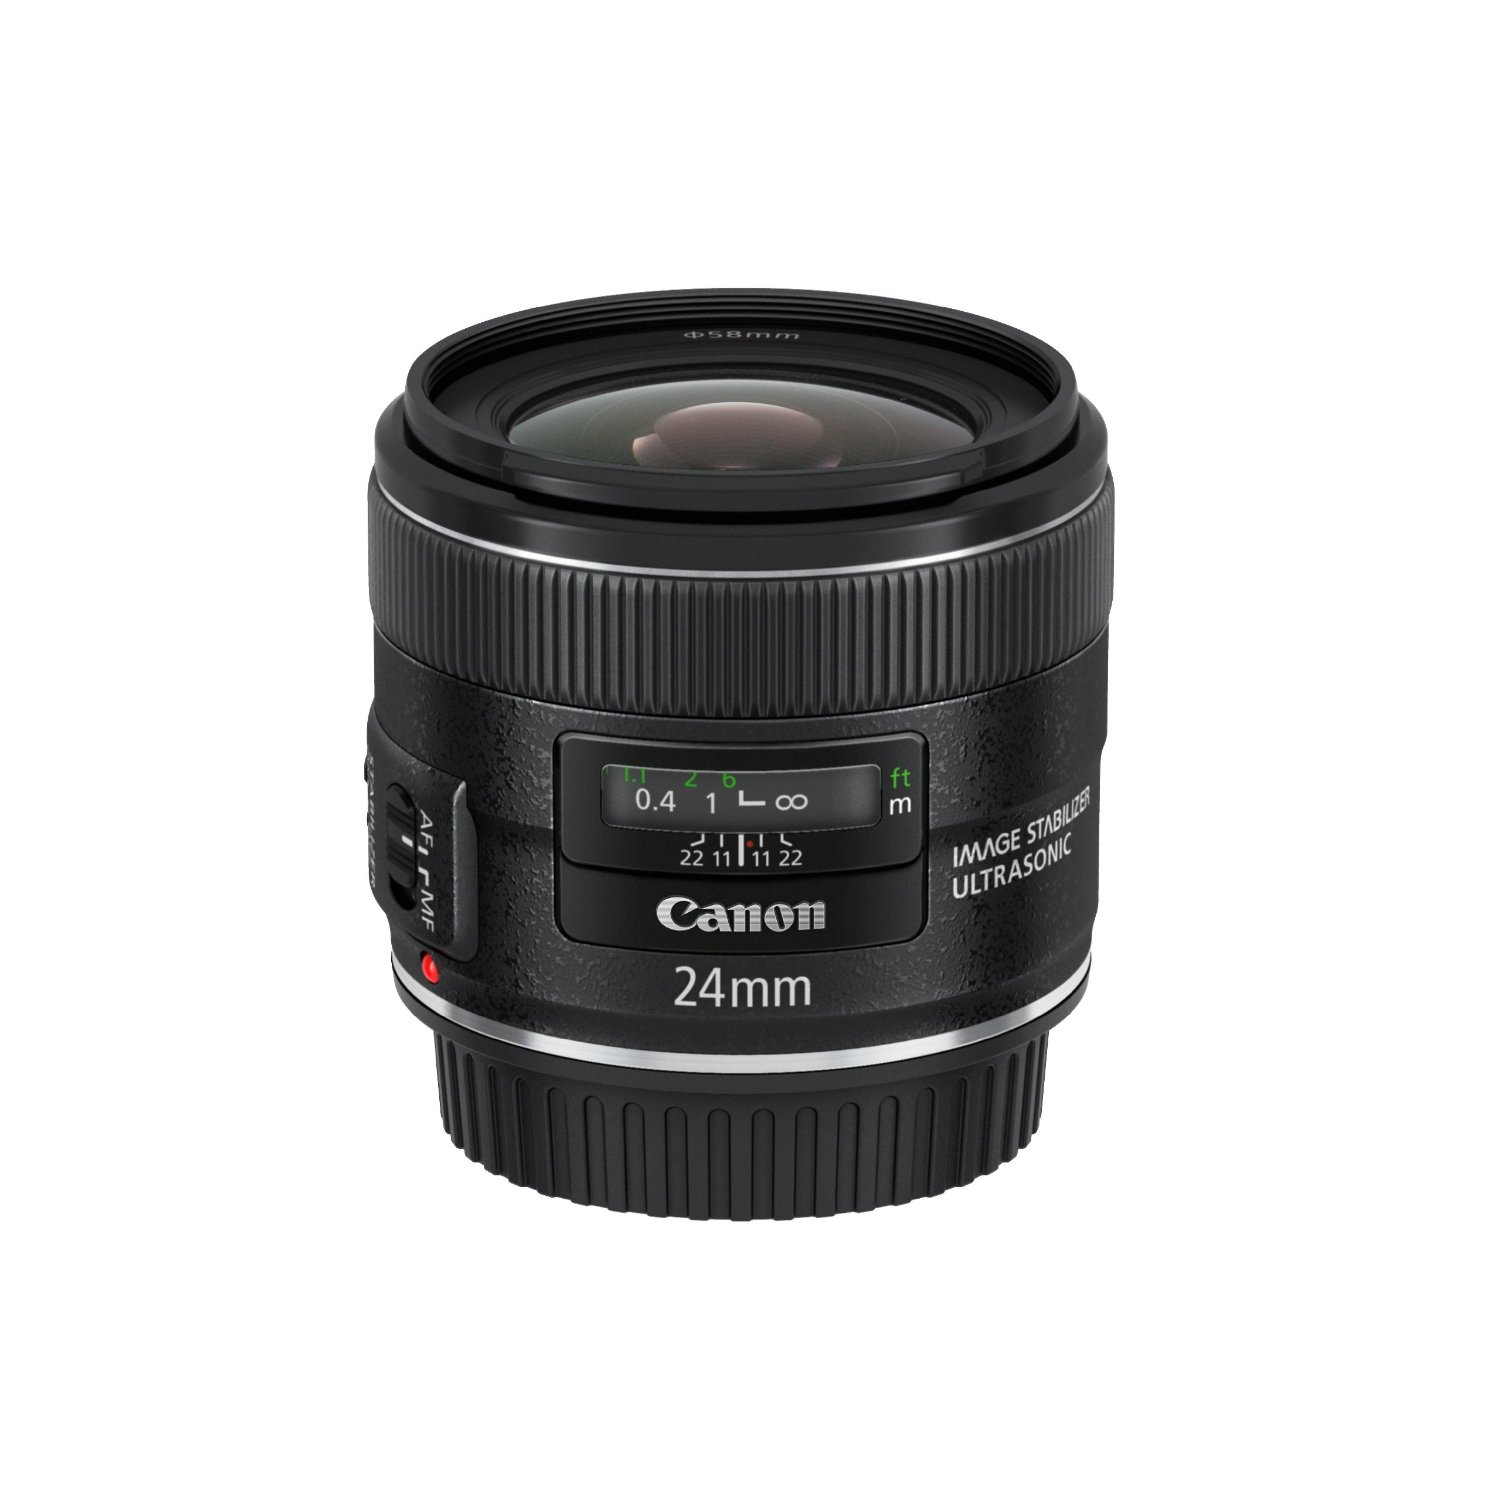 Canon EF 24mm f/2.8 IS USM Wide Angle Lens  $657.00